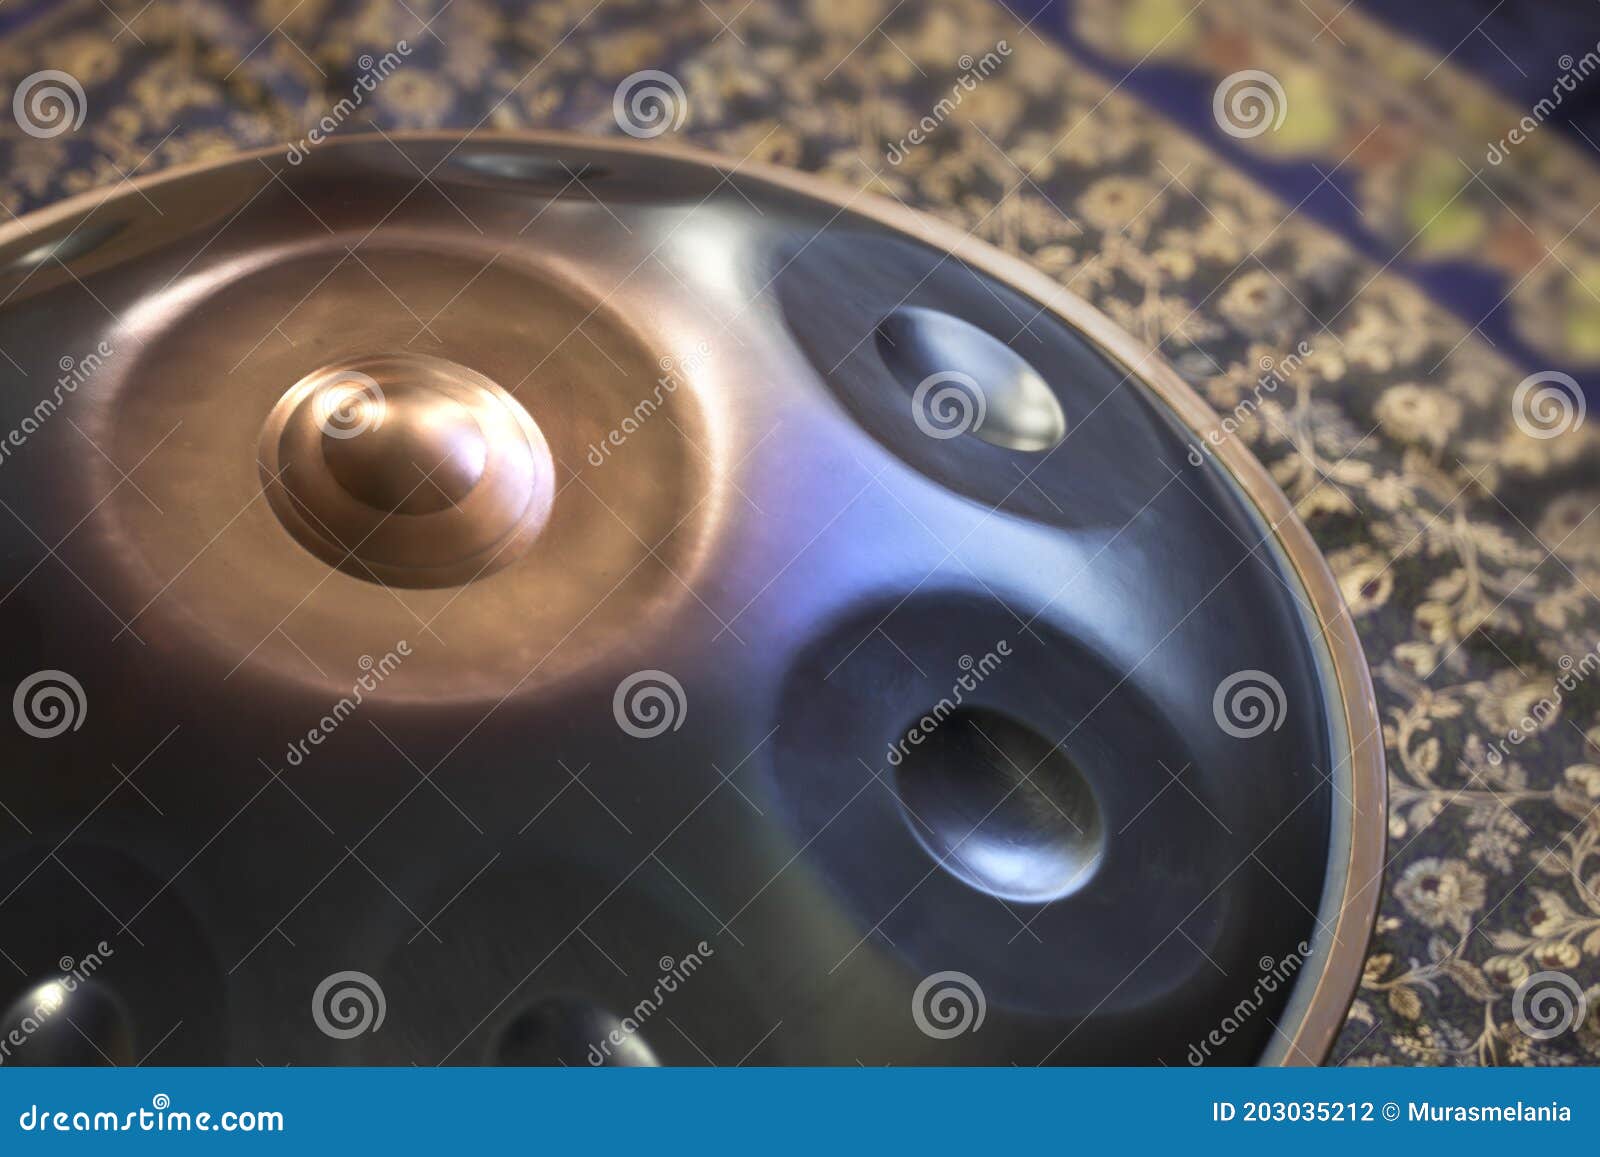 https://thumbs.dreamstime.com/z/hang-drum-hand-pan-music-instrument-made-metal-percussion-ethnic-drum-instrument-close-up-hang-drum-hang-handpad-drum-203035212.jpg